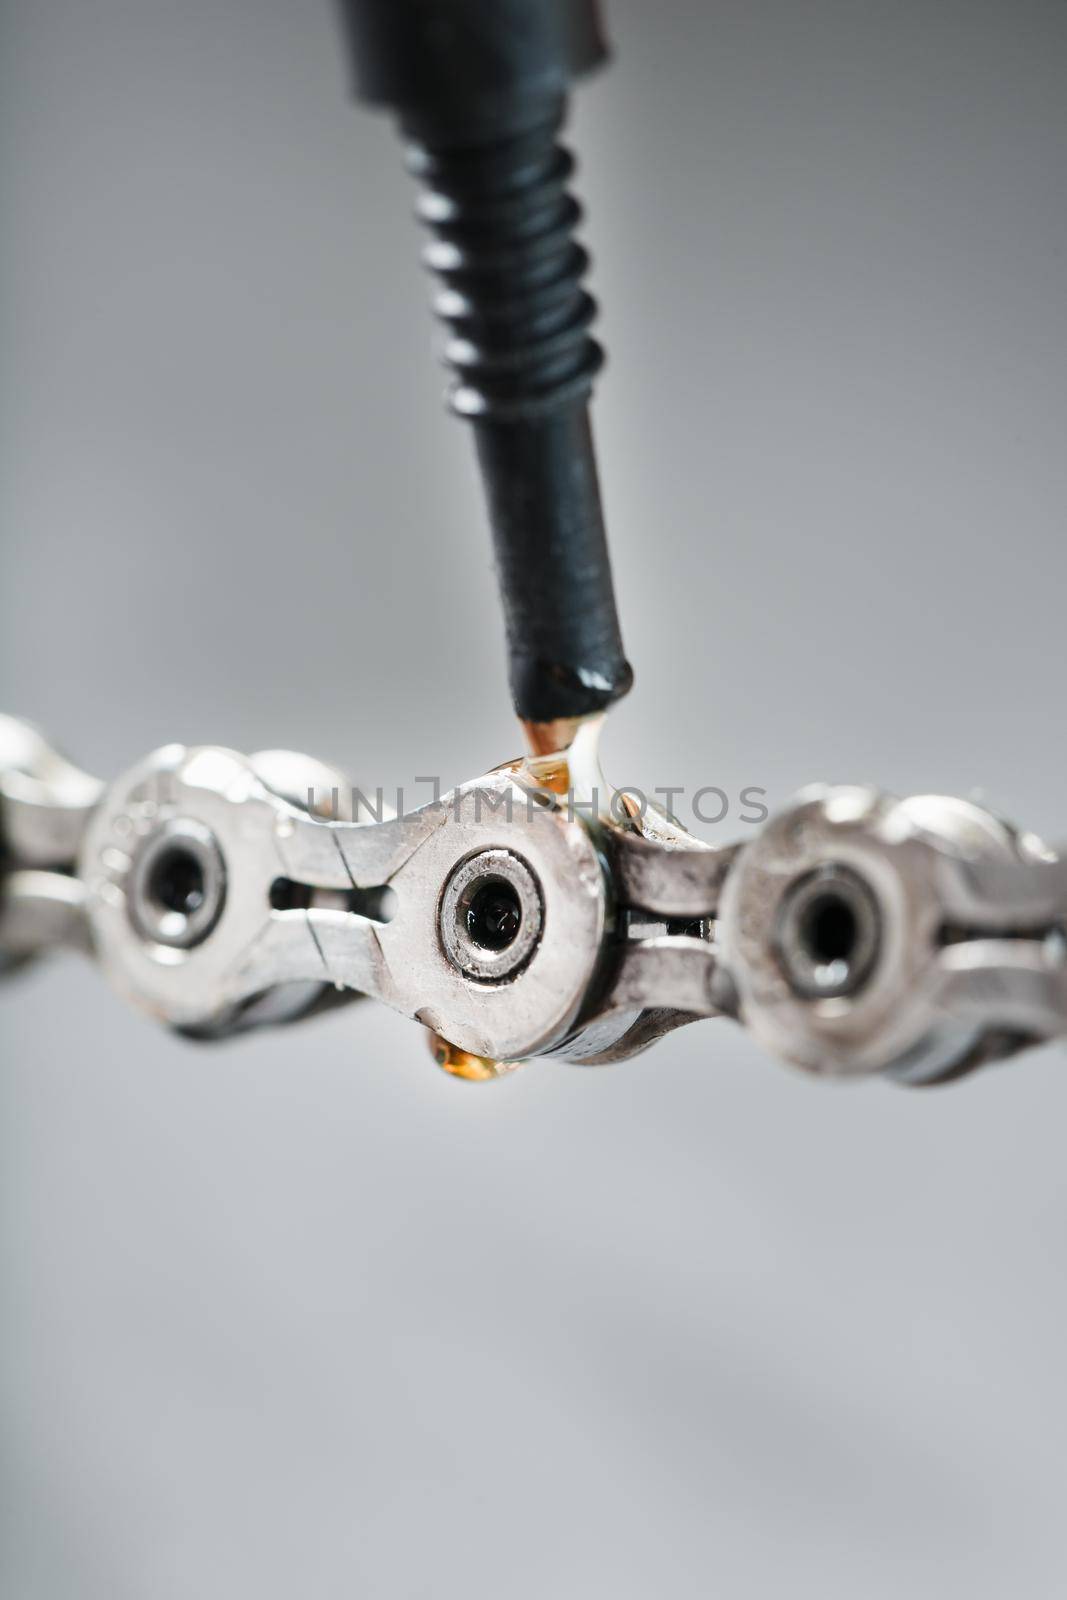 Greasing a bicycle chain with a drop of golden oil close-up on a gray background. Taking care of the bike drive system.